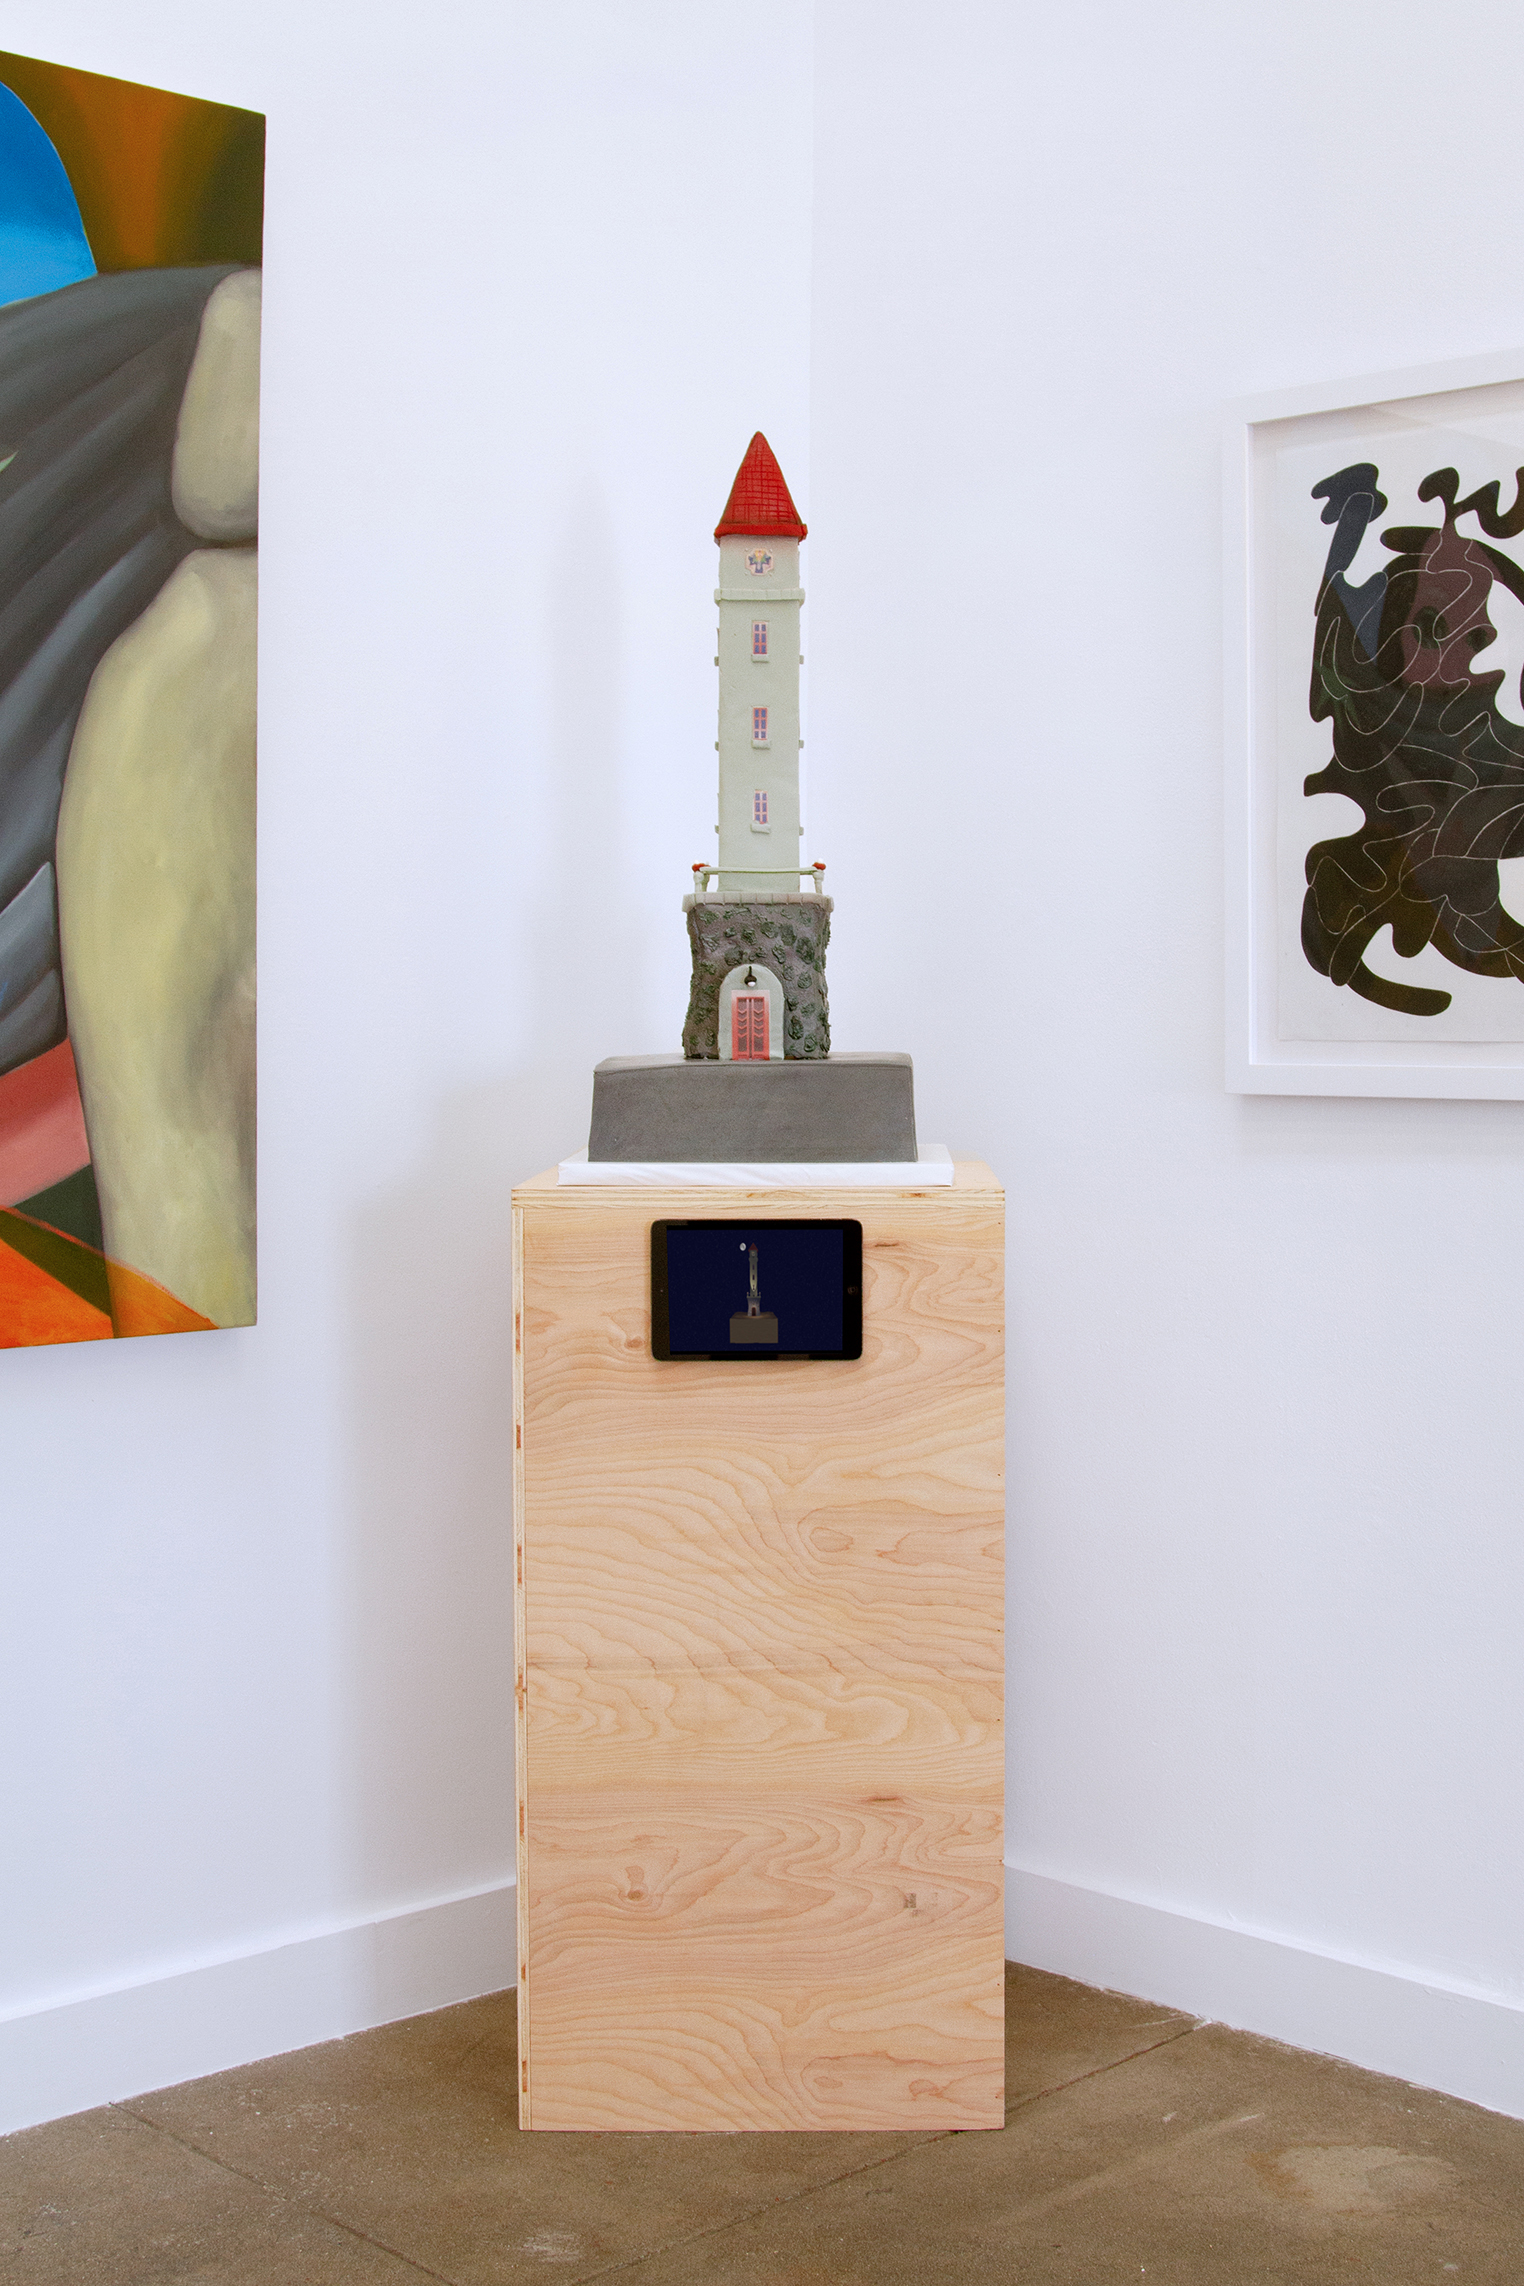 Installation view of a tower shaped cake on a wooden pedestal inbetween two painings